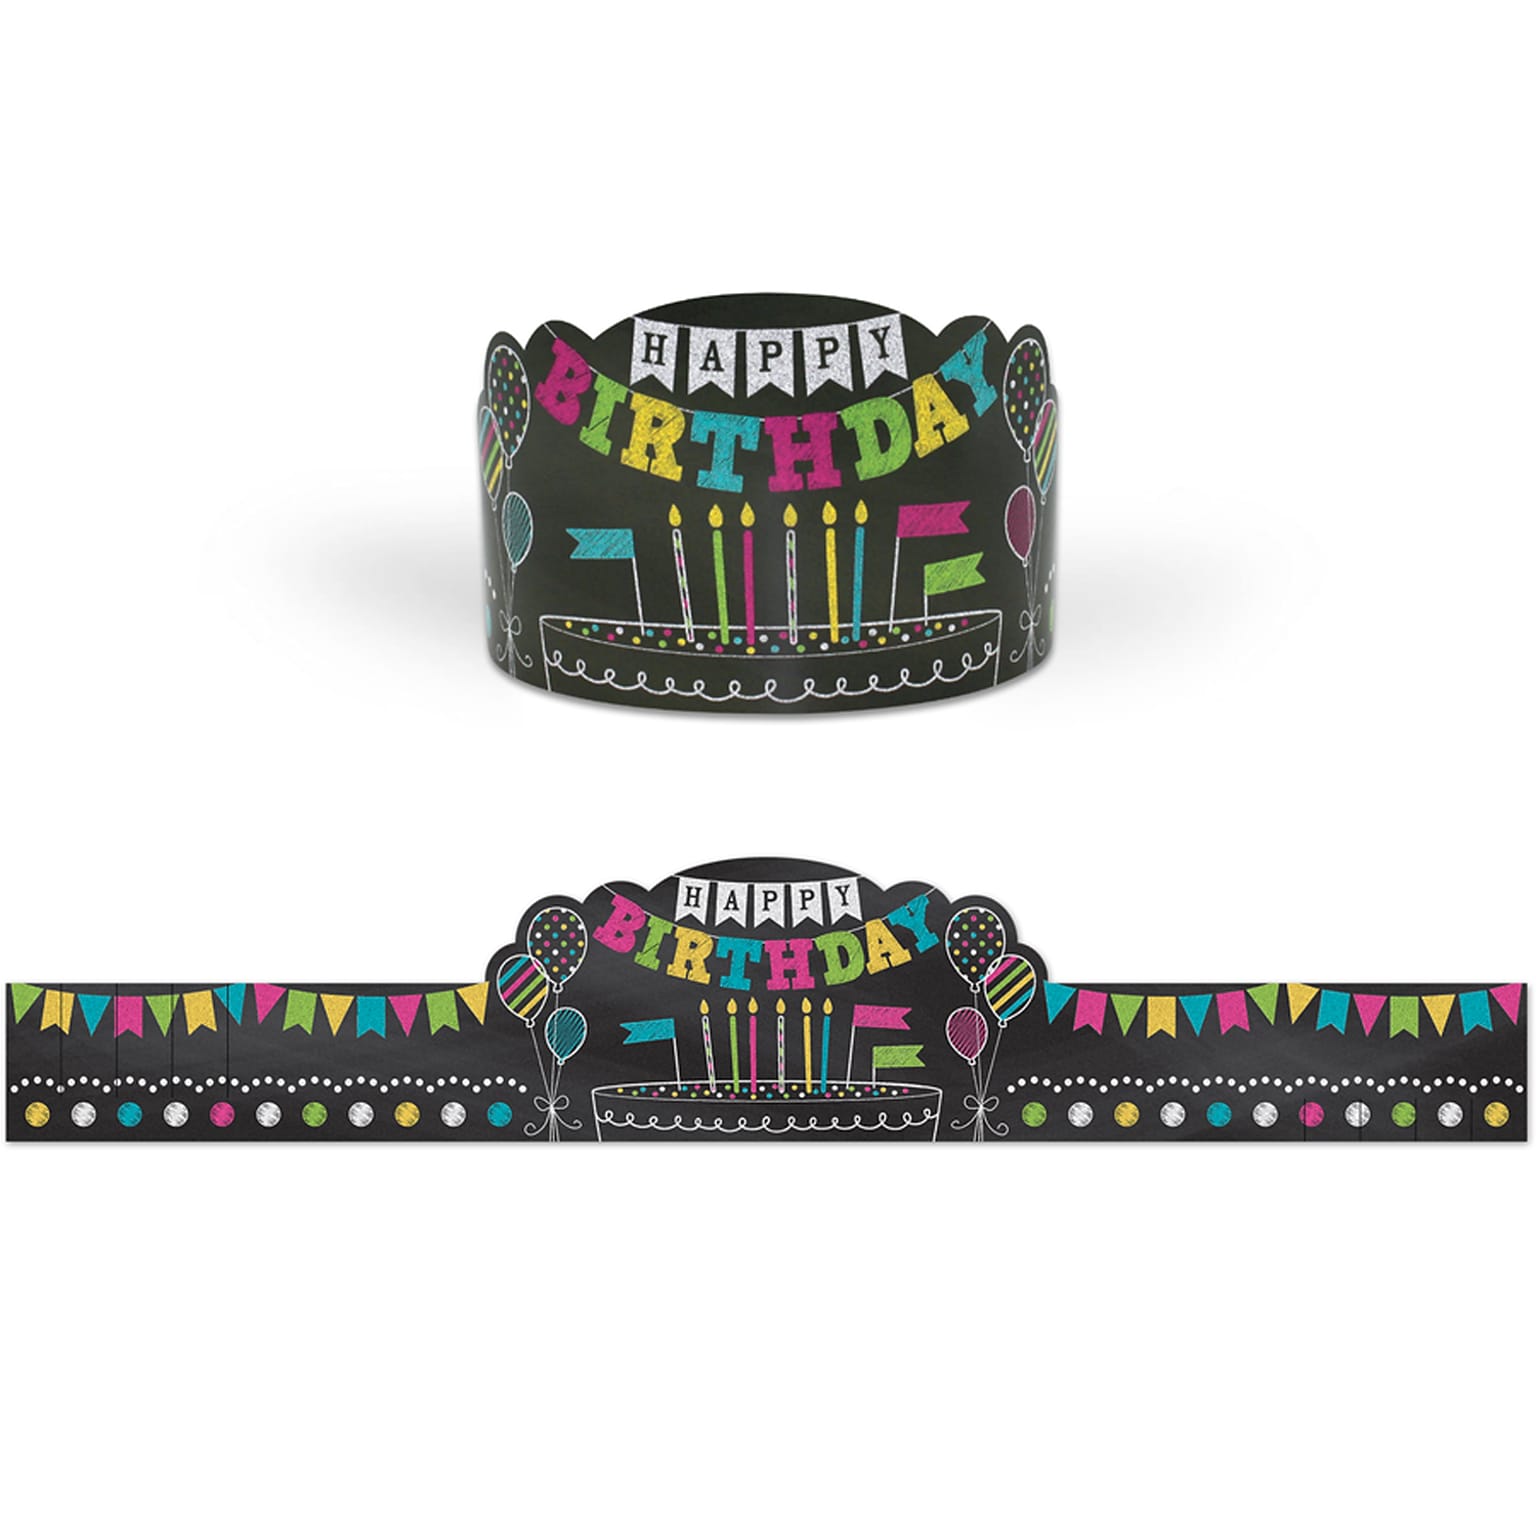 Teacher Created Resources Chalkboard Brights Happy Birthday Crowns, 24 x 4-1/2, Black/Multicolor, 30/Pack (TCR1211)